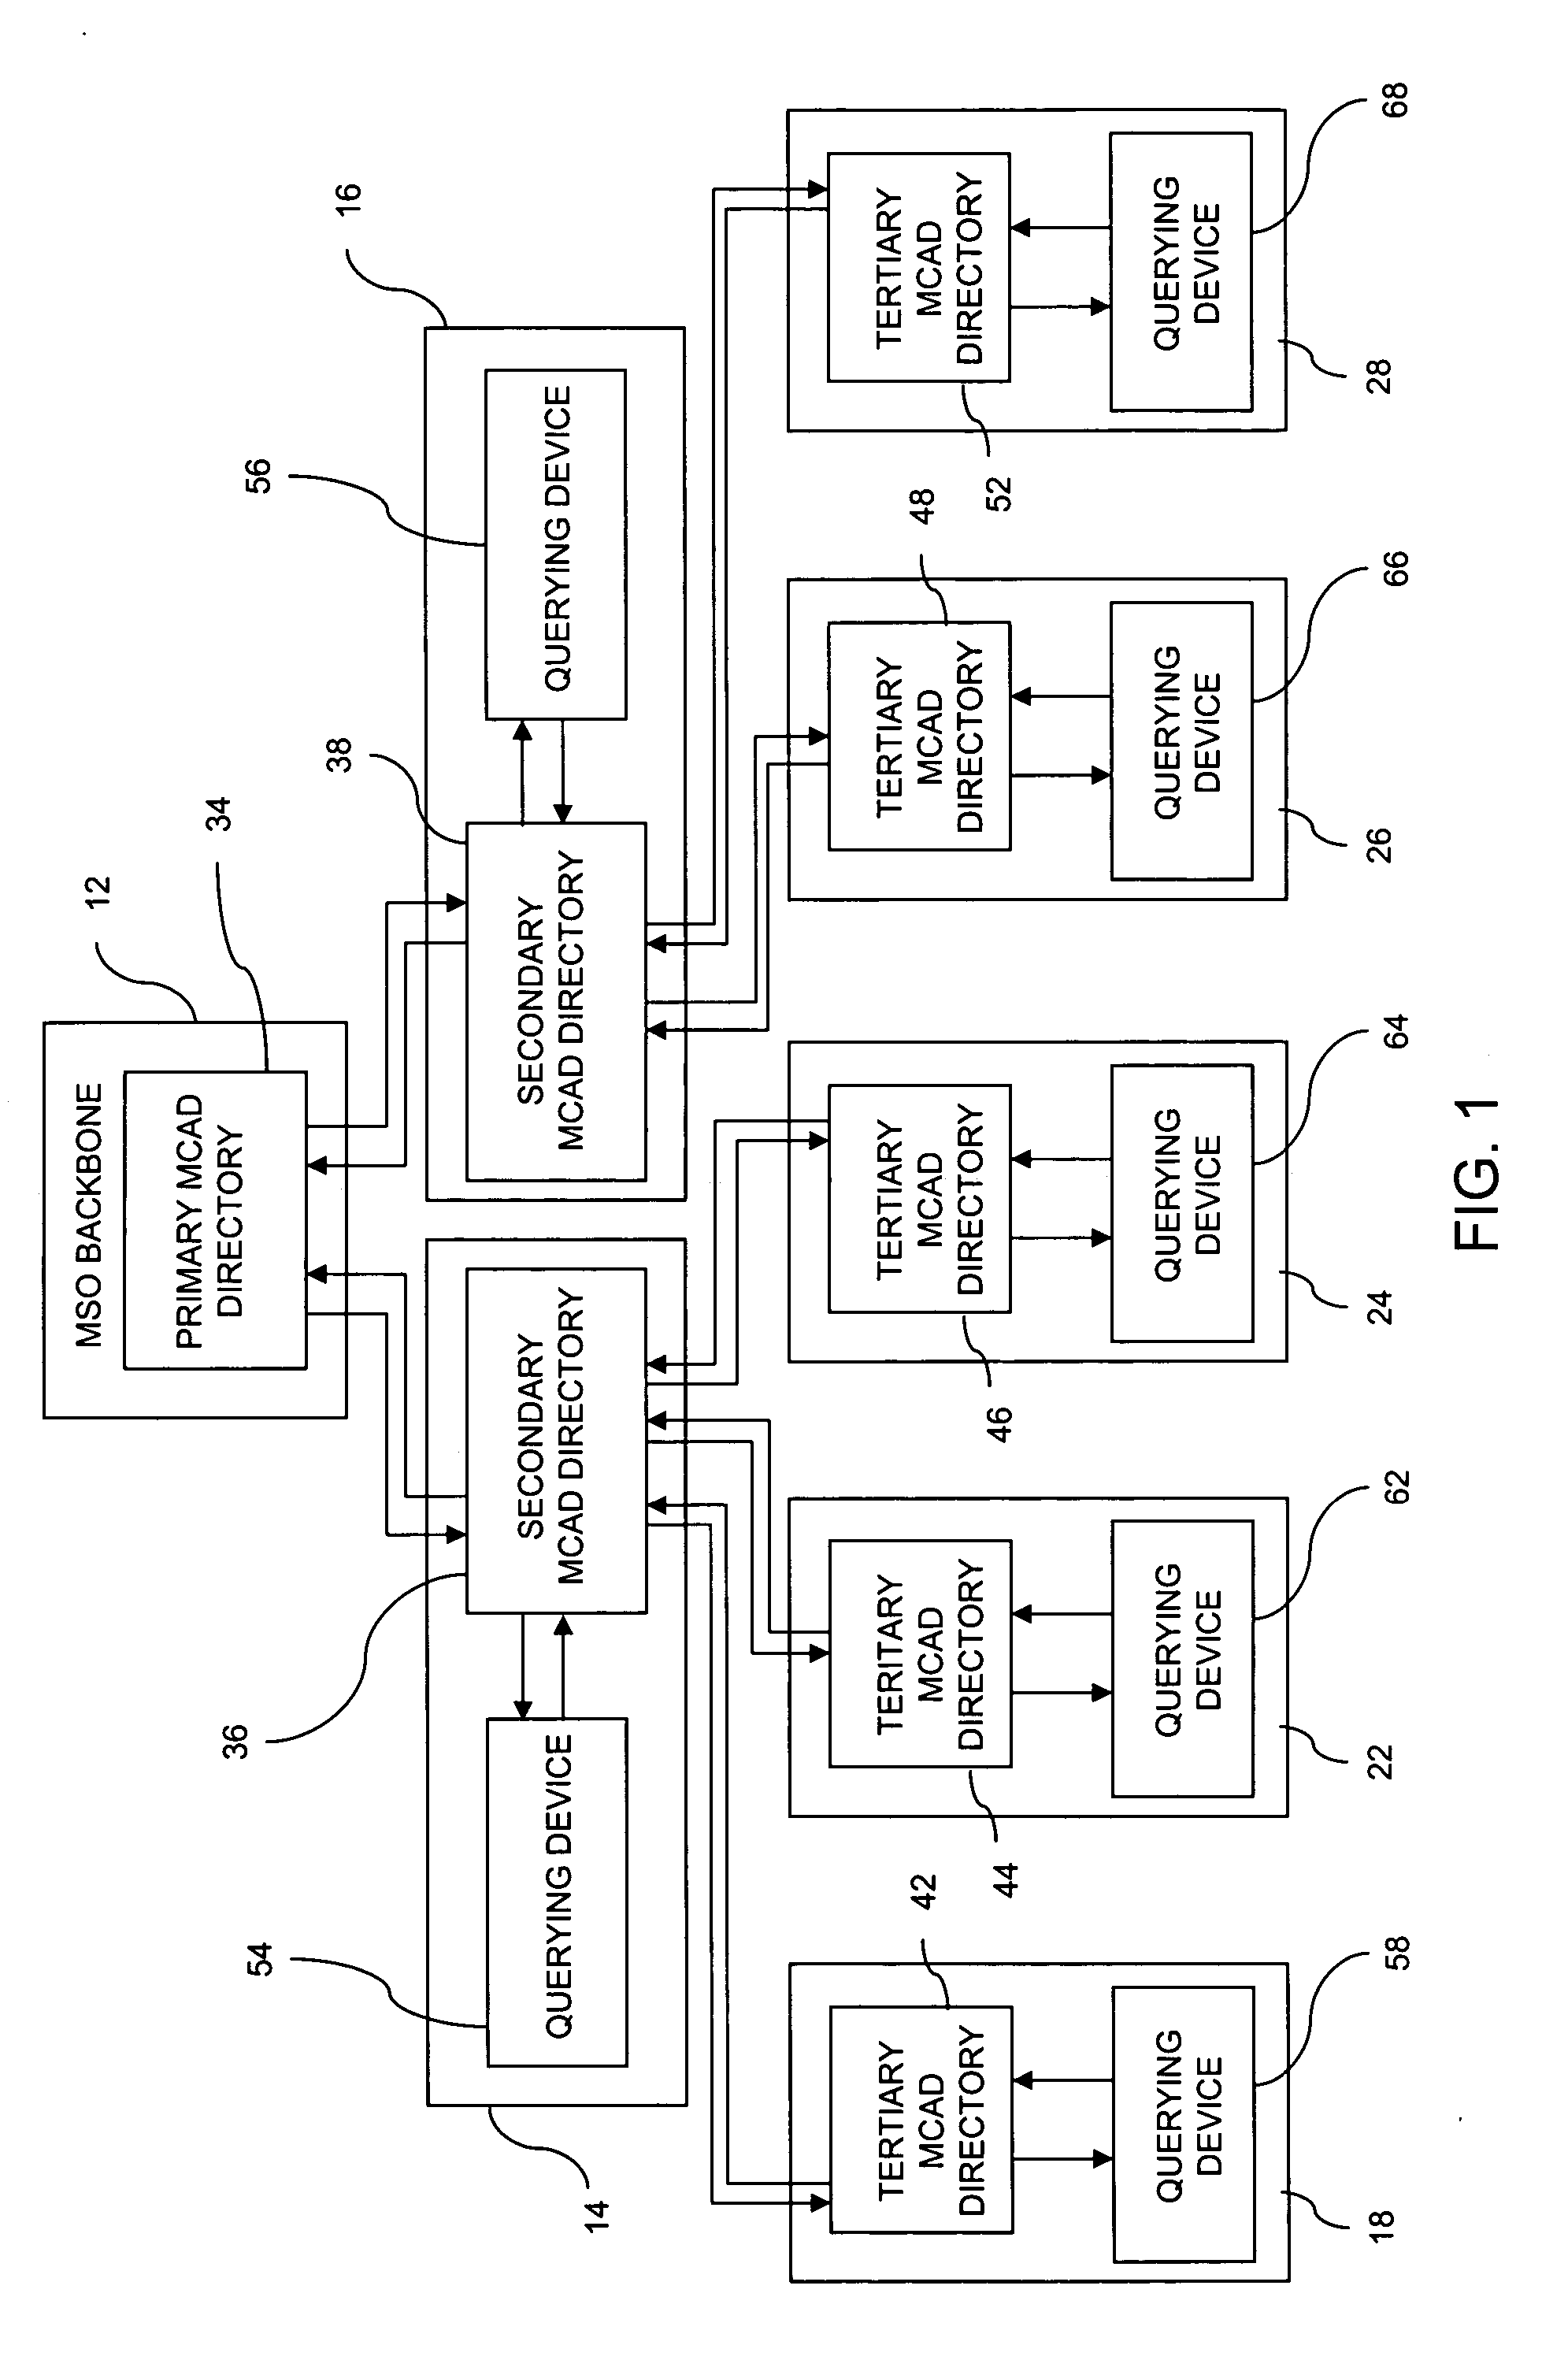 IP multicast management and service provision system and method